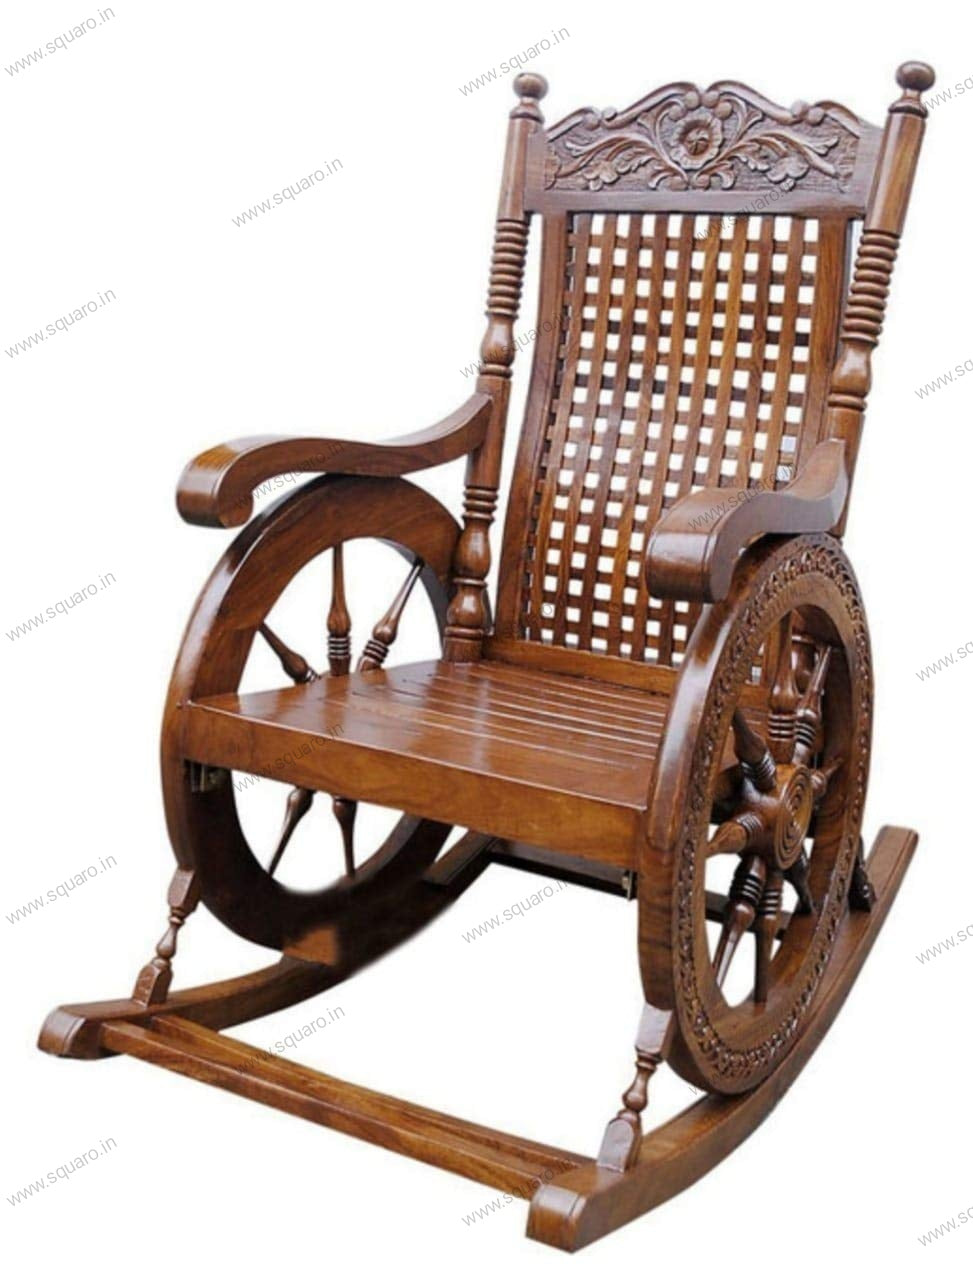 Sheesham Handcrafted Wooden Rocking Chair Wooden armrest Chair with Back Support for Living Room (Dark Brown)